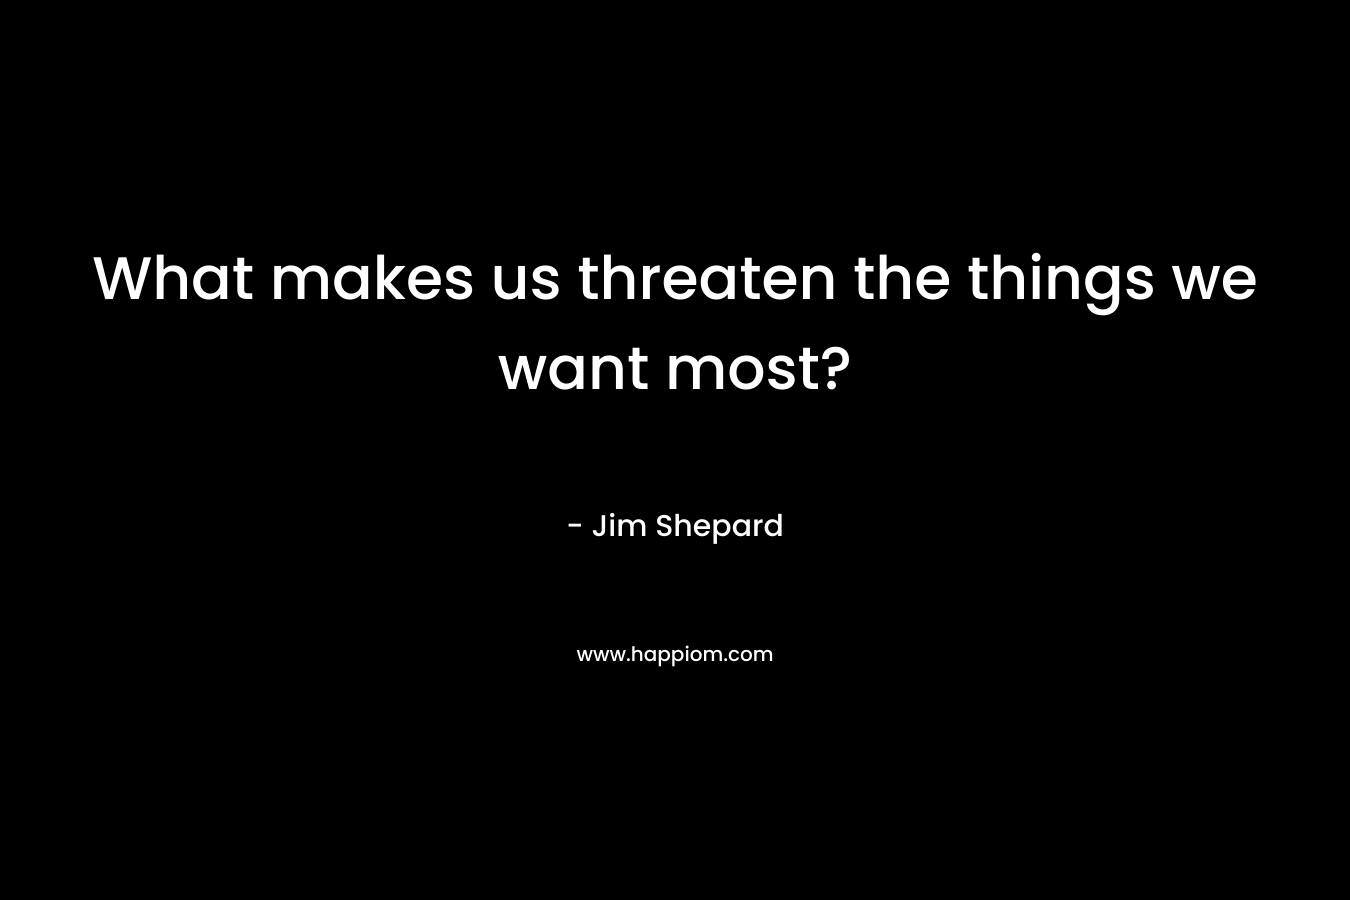 What makes us threaten the things we want most? – Jim Shepard